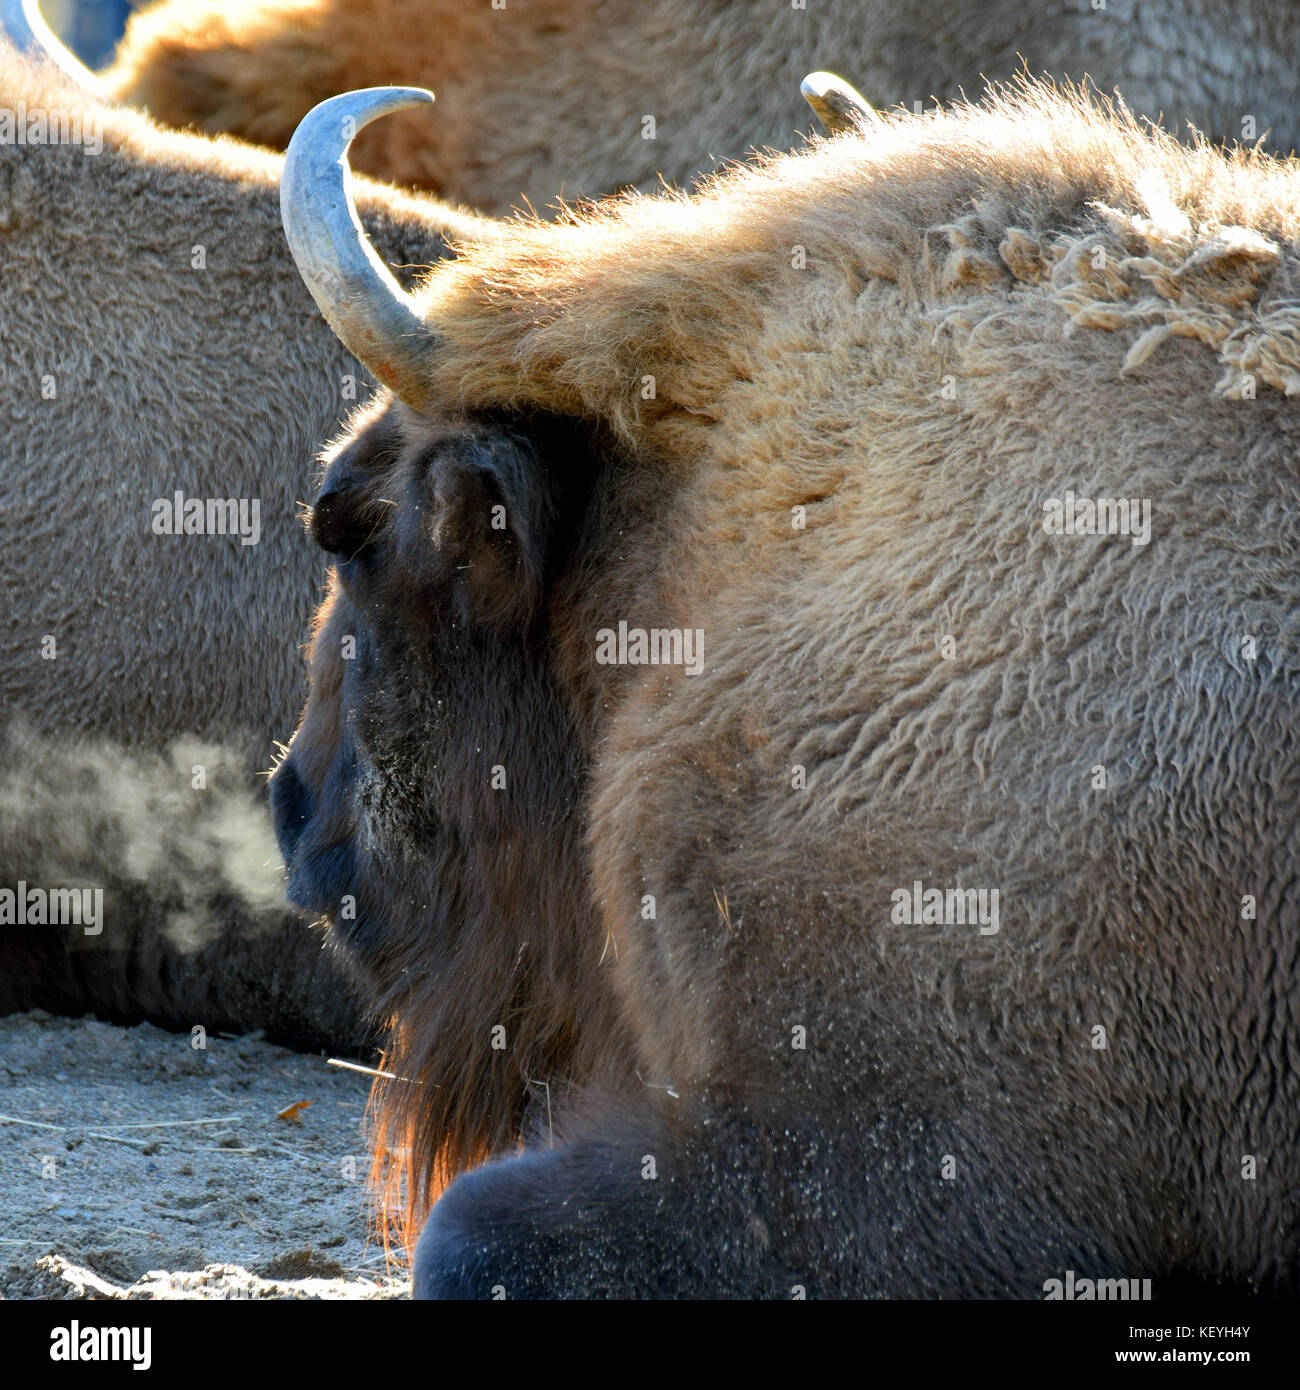 Wisent, also know as European bison (Bison bonasus) with steamy breath on a cold morning. Square shape image. Stock Photo